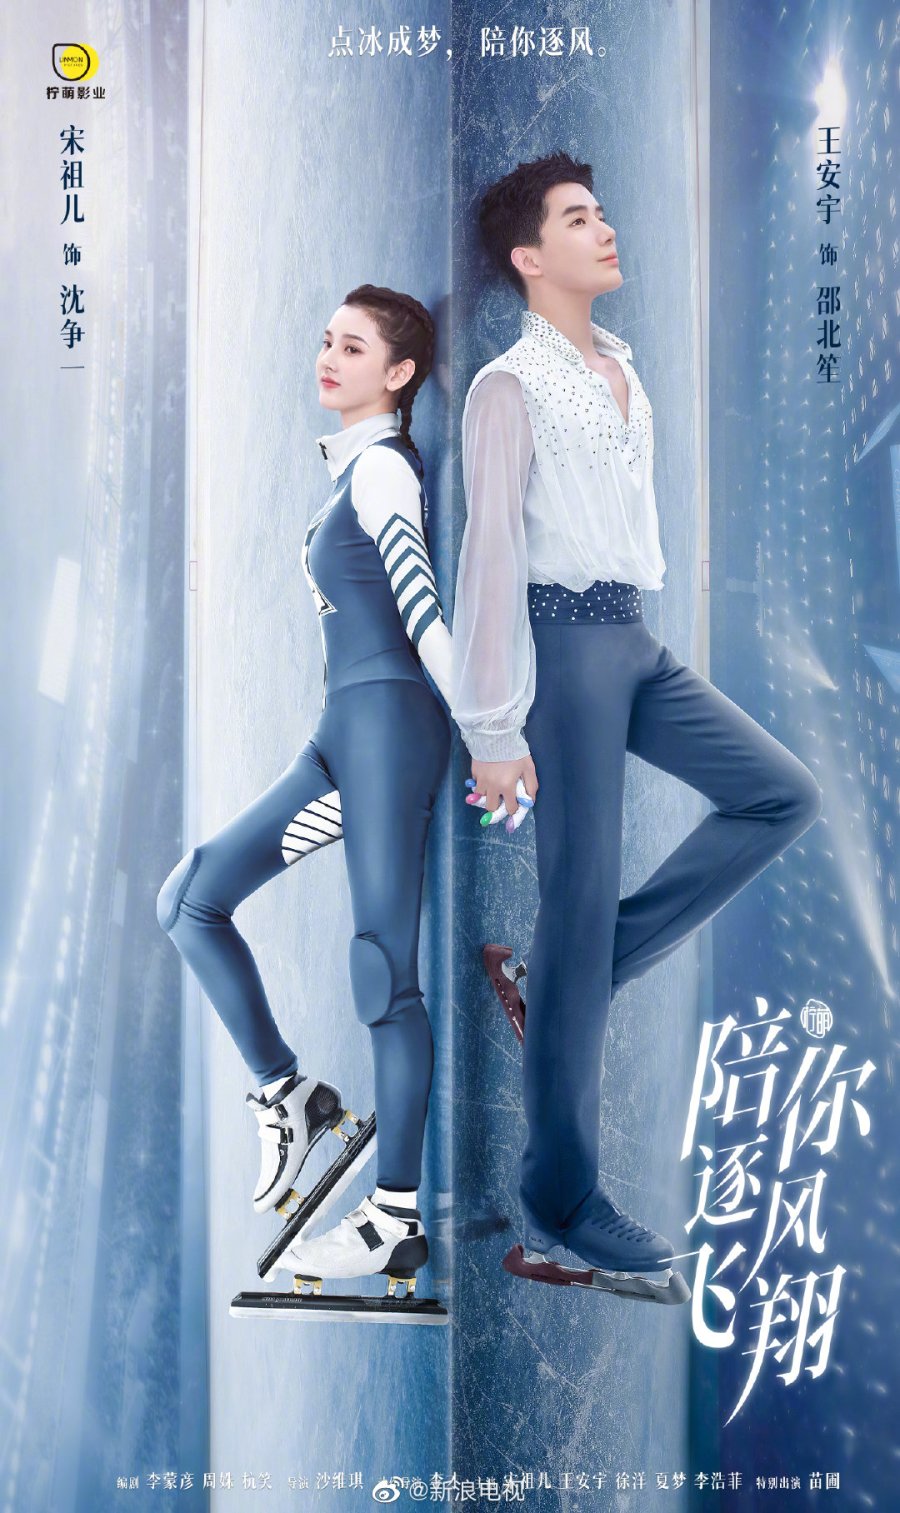 image poster from imdb - ​To Fly With You (2021)